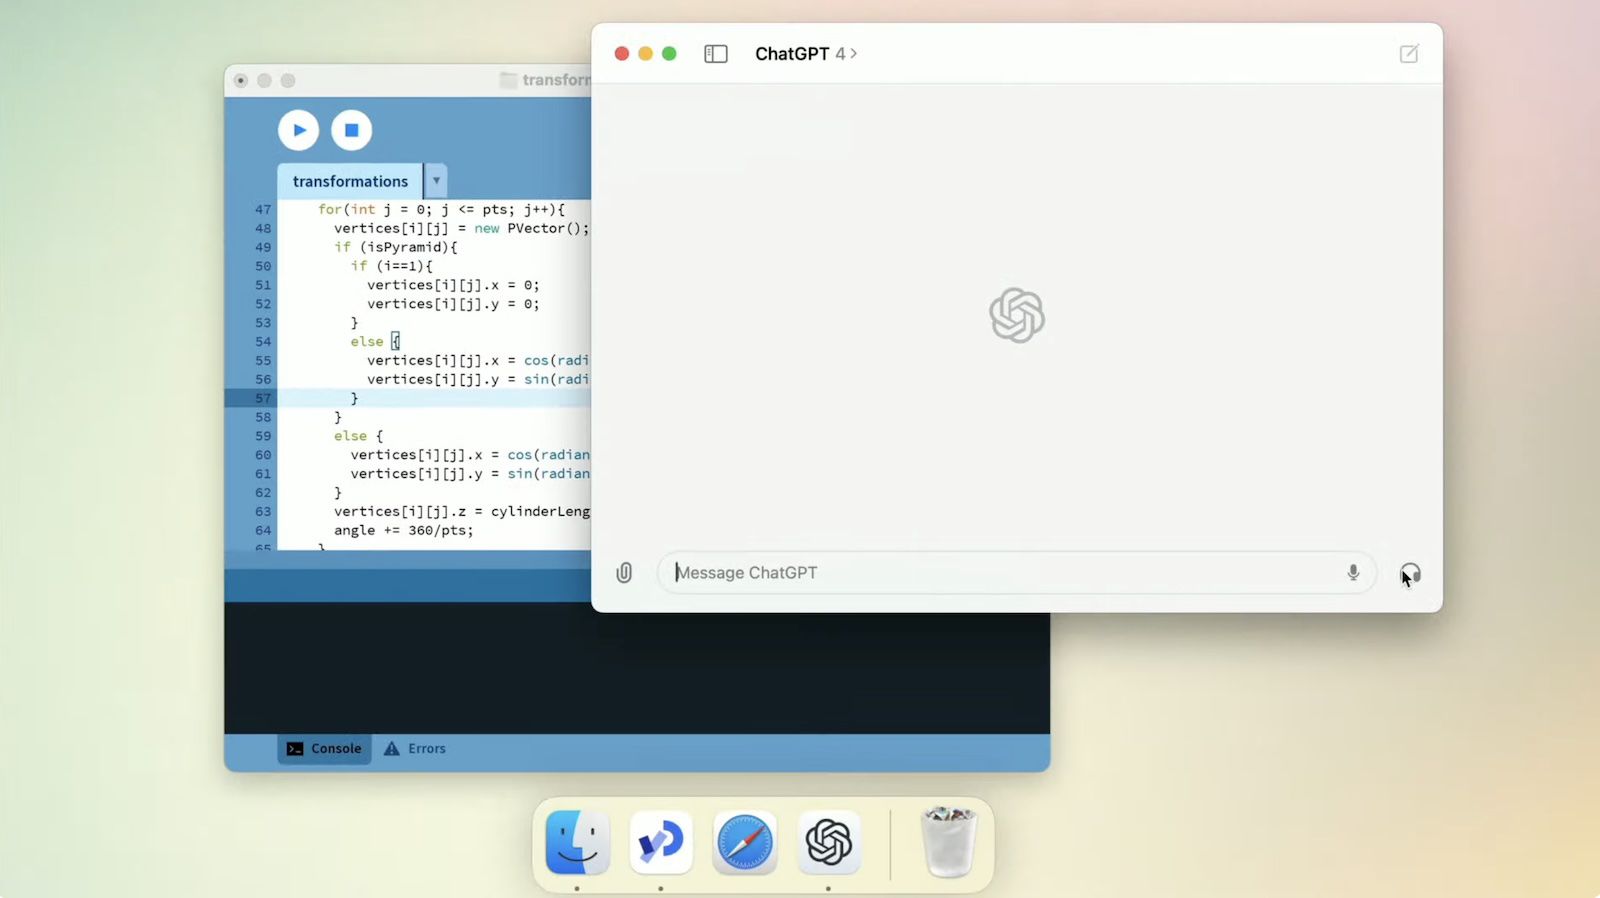 ChatGPT Mac App with Screen-Viewing Feature Could Have Ethical Considerations